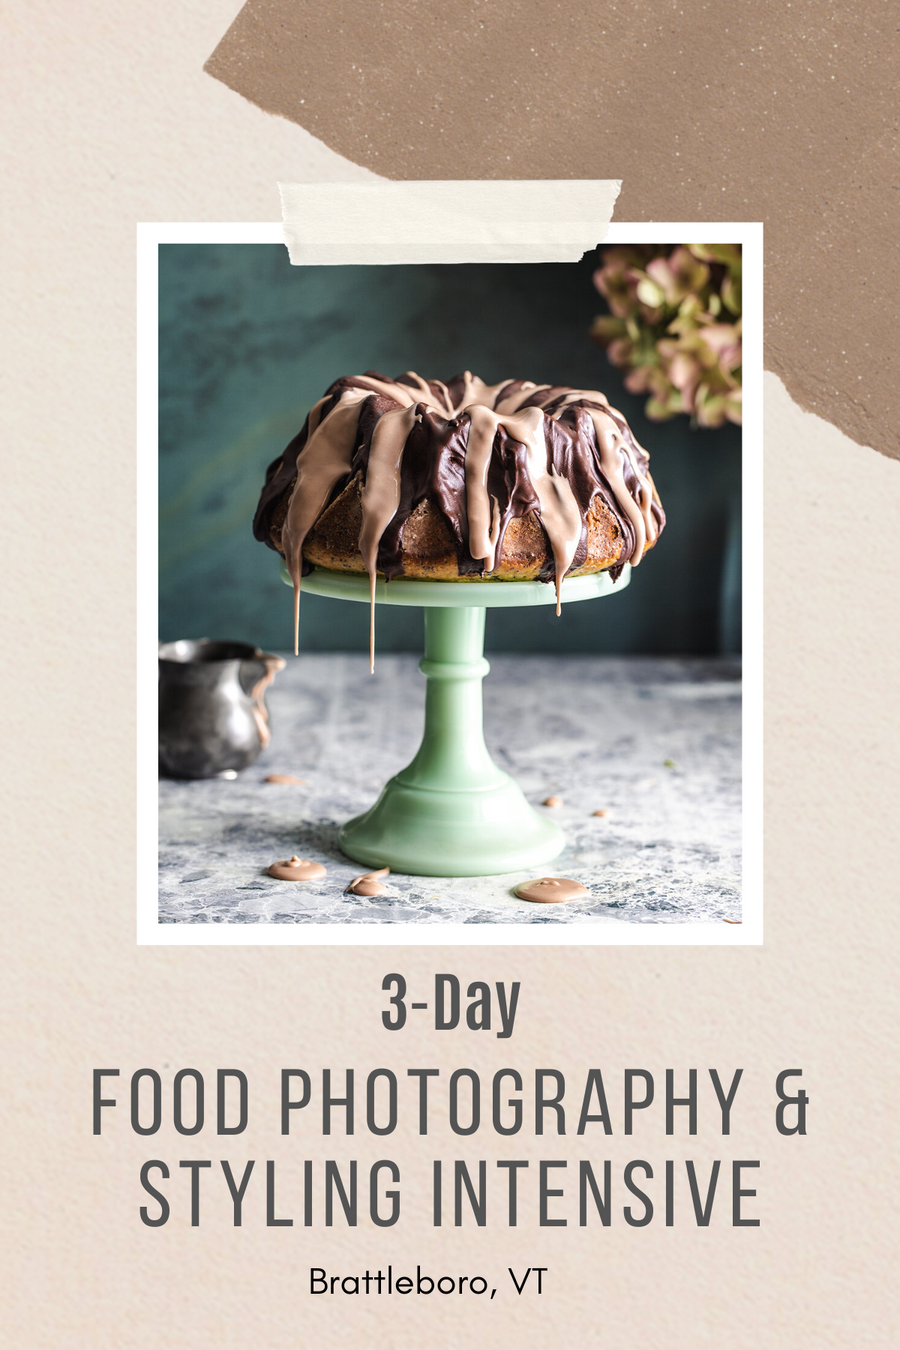 3-Day Food Photography & Styling Intensive